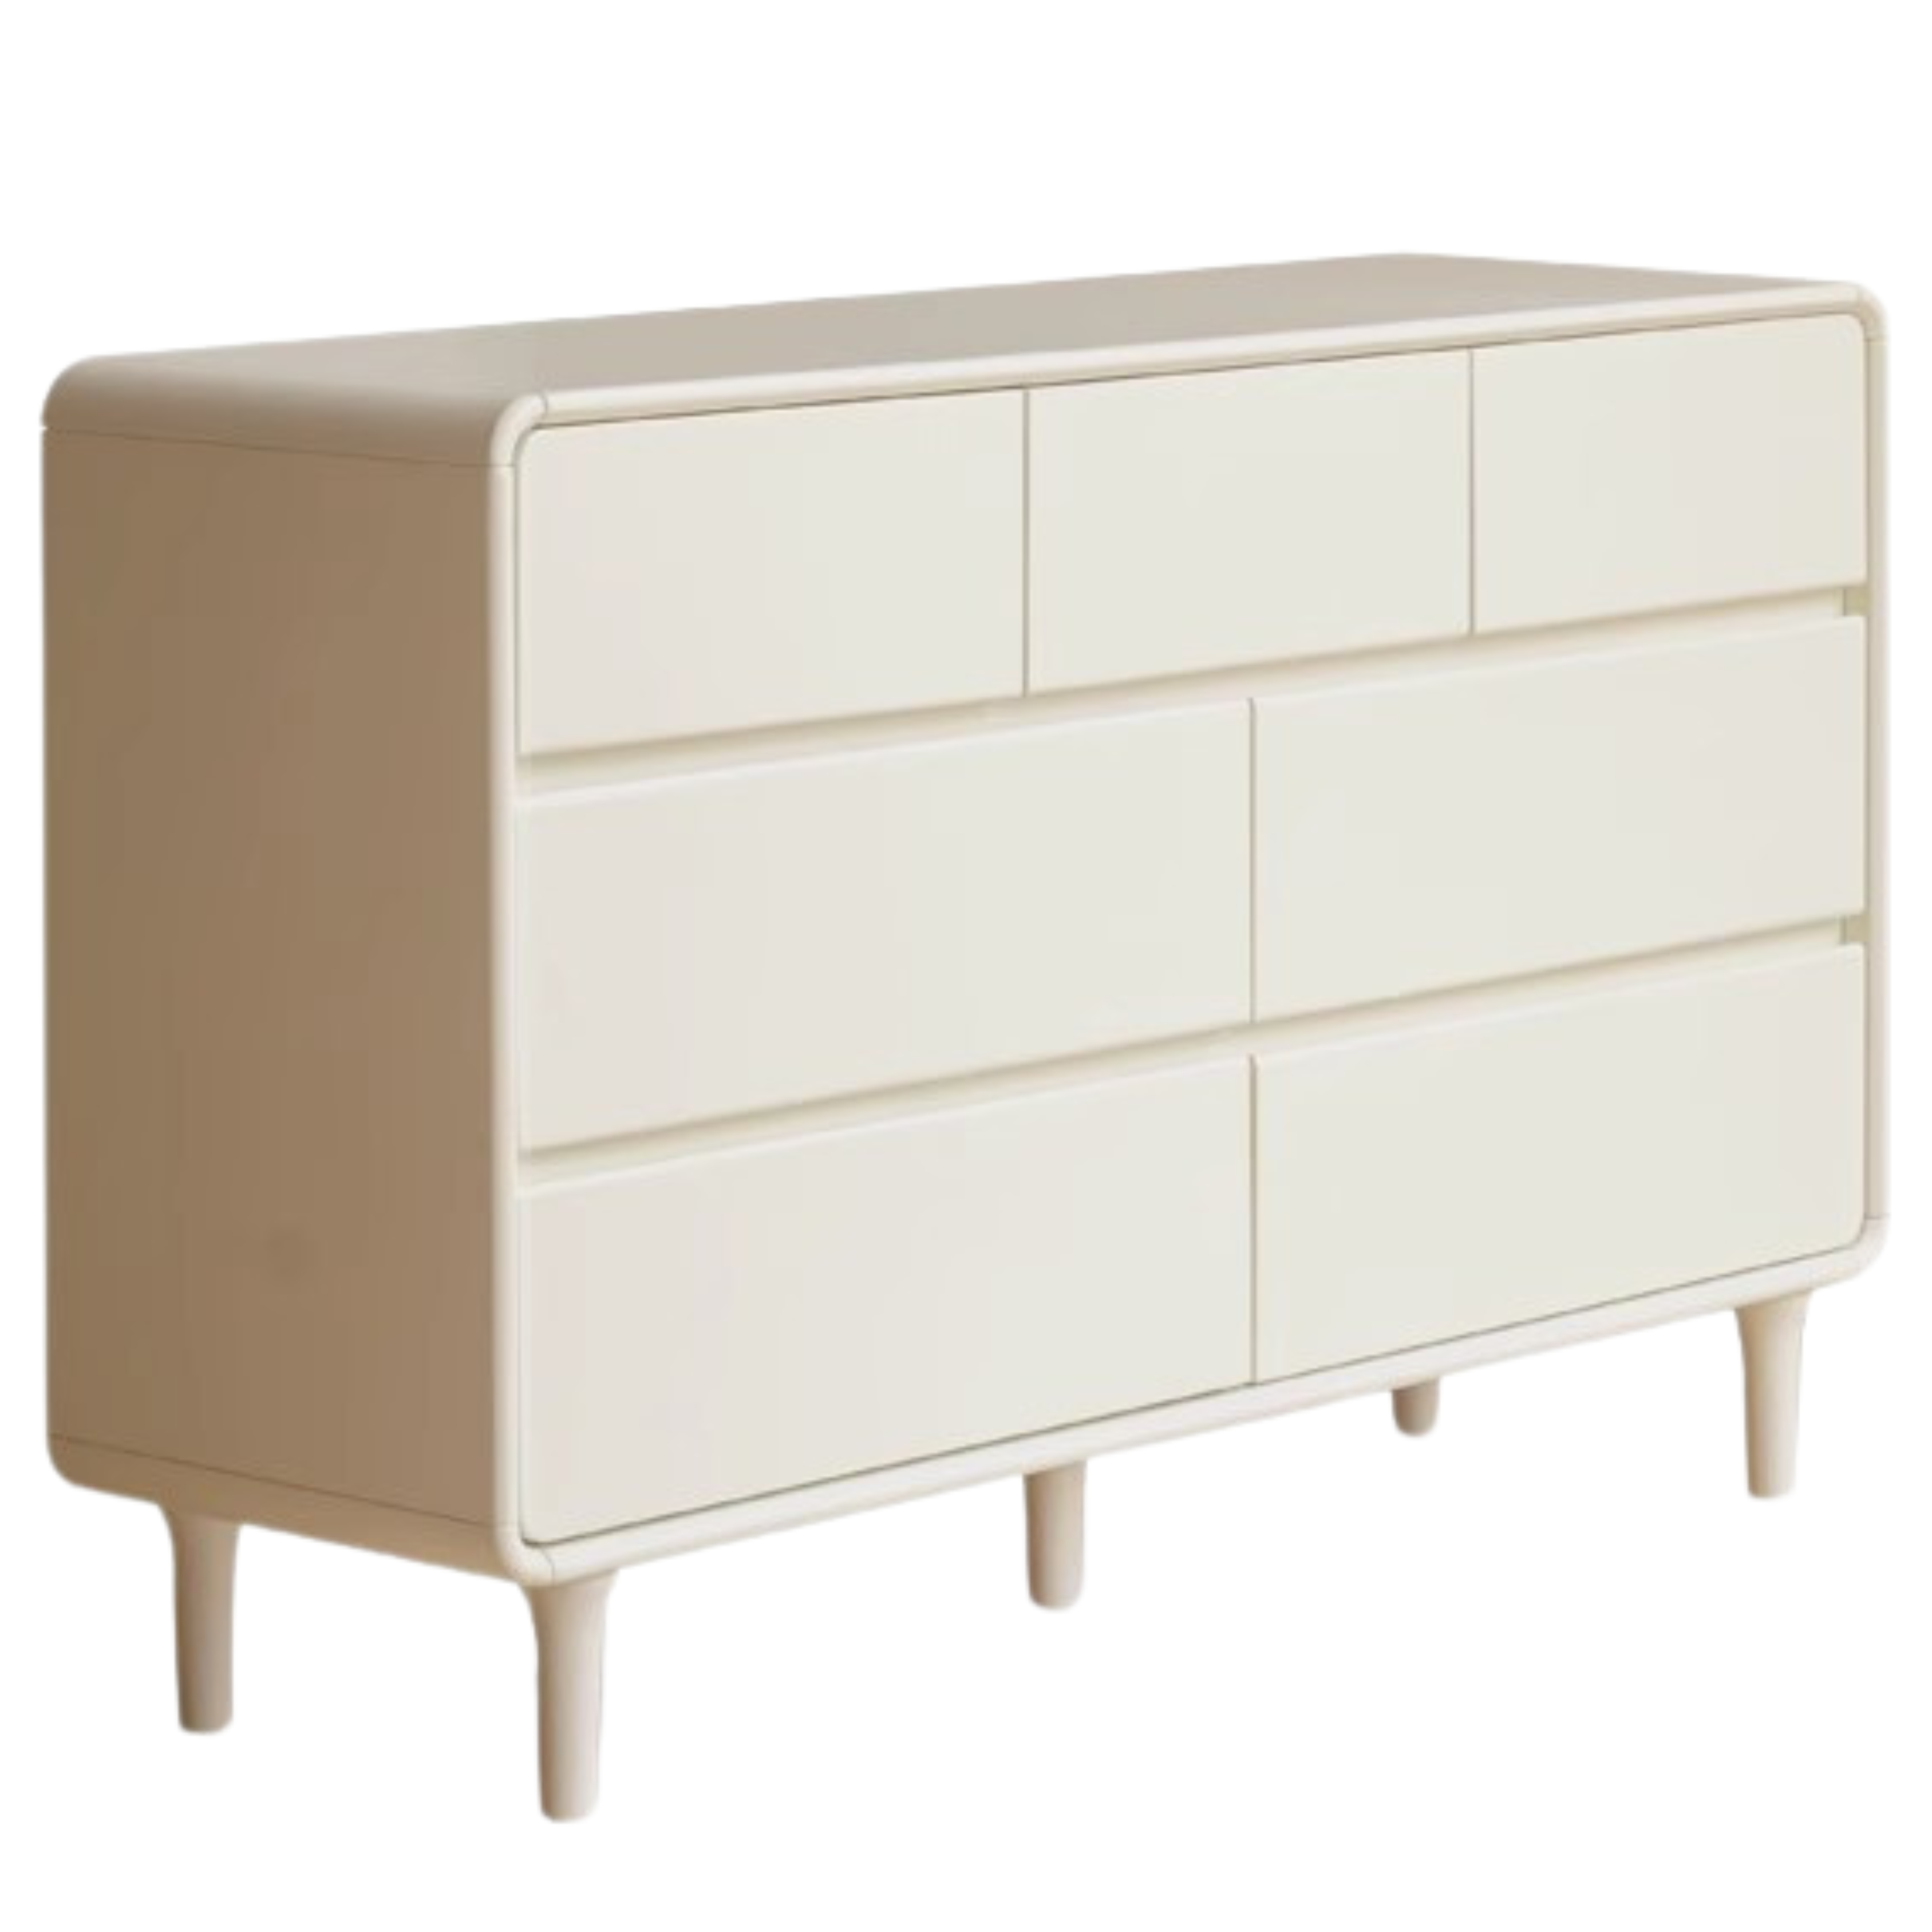 Ash solid wood Cream style chest of drawers